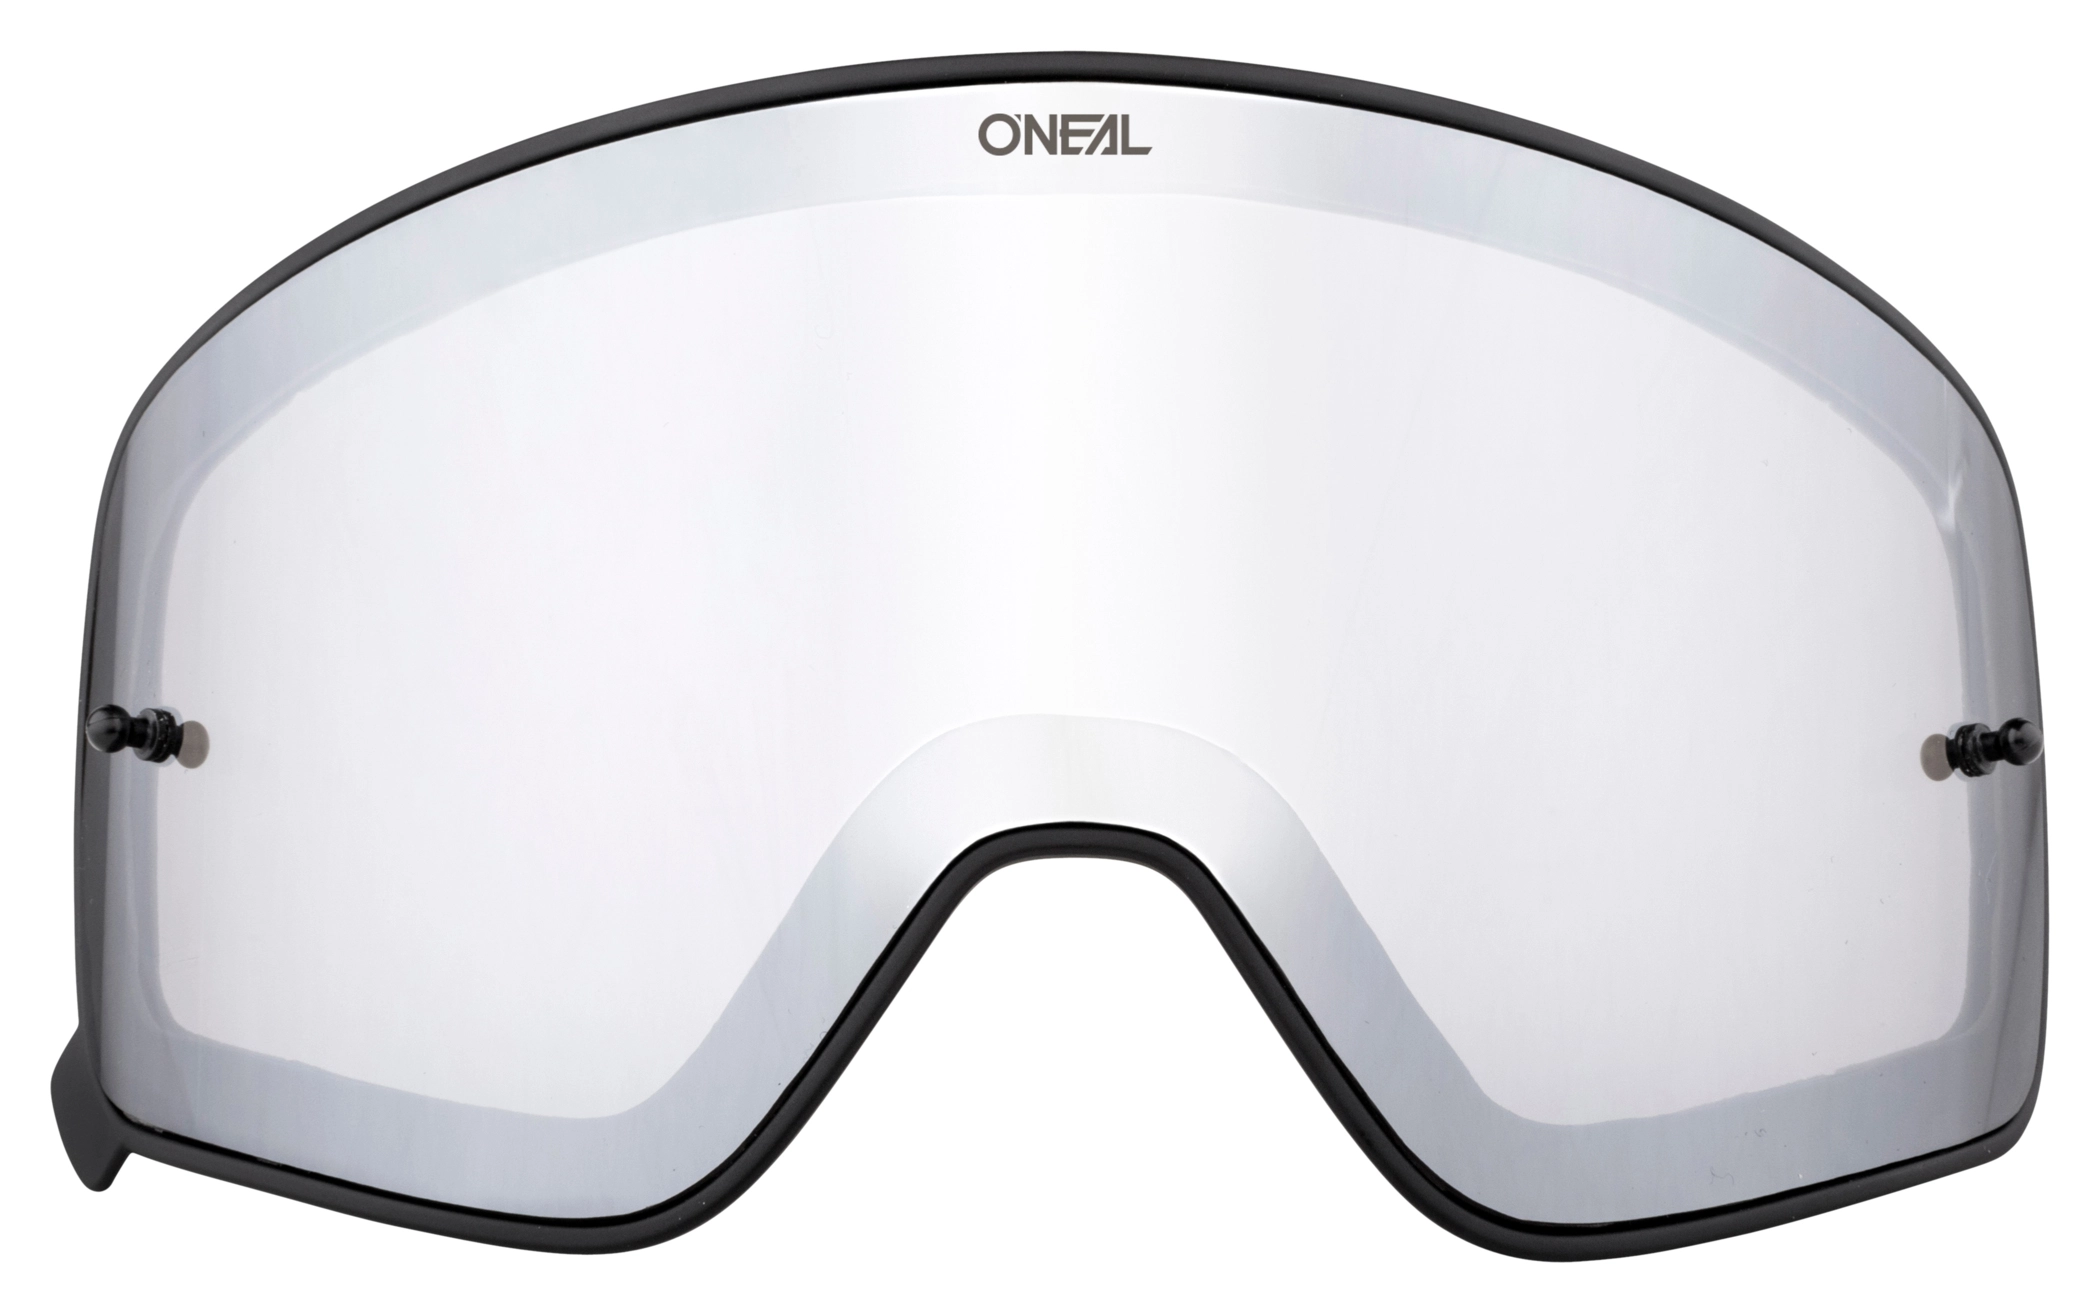 ONEAL B-50 SPARE LENS